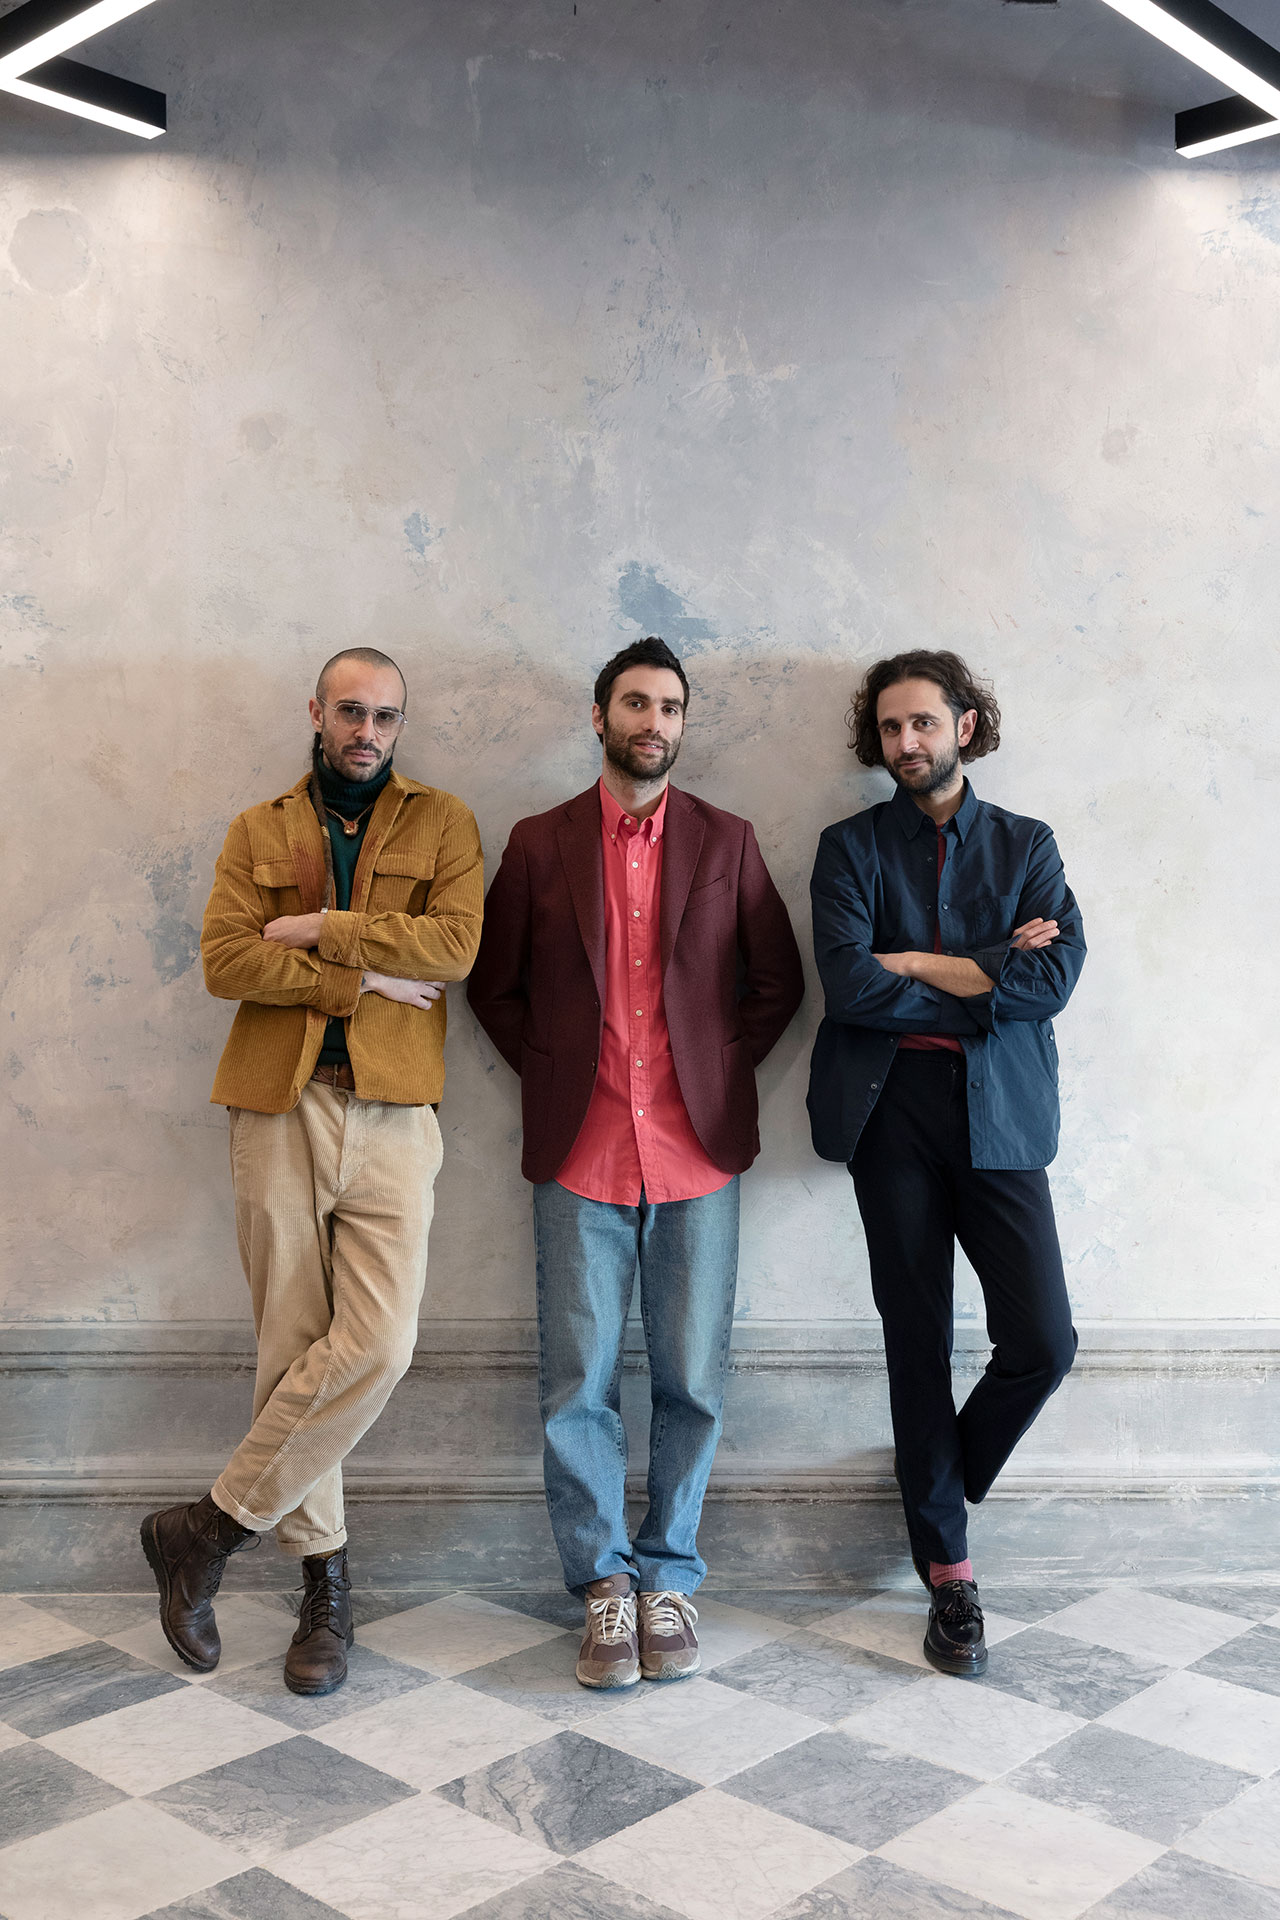 TIMOTHEE Studio founders, Andrea Mascagni (left), Cosimo Bonciani (middle) and Niccoló Antonielli (right).
Photography by Helenio Barbetta.